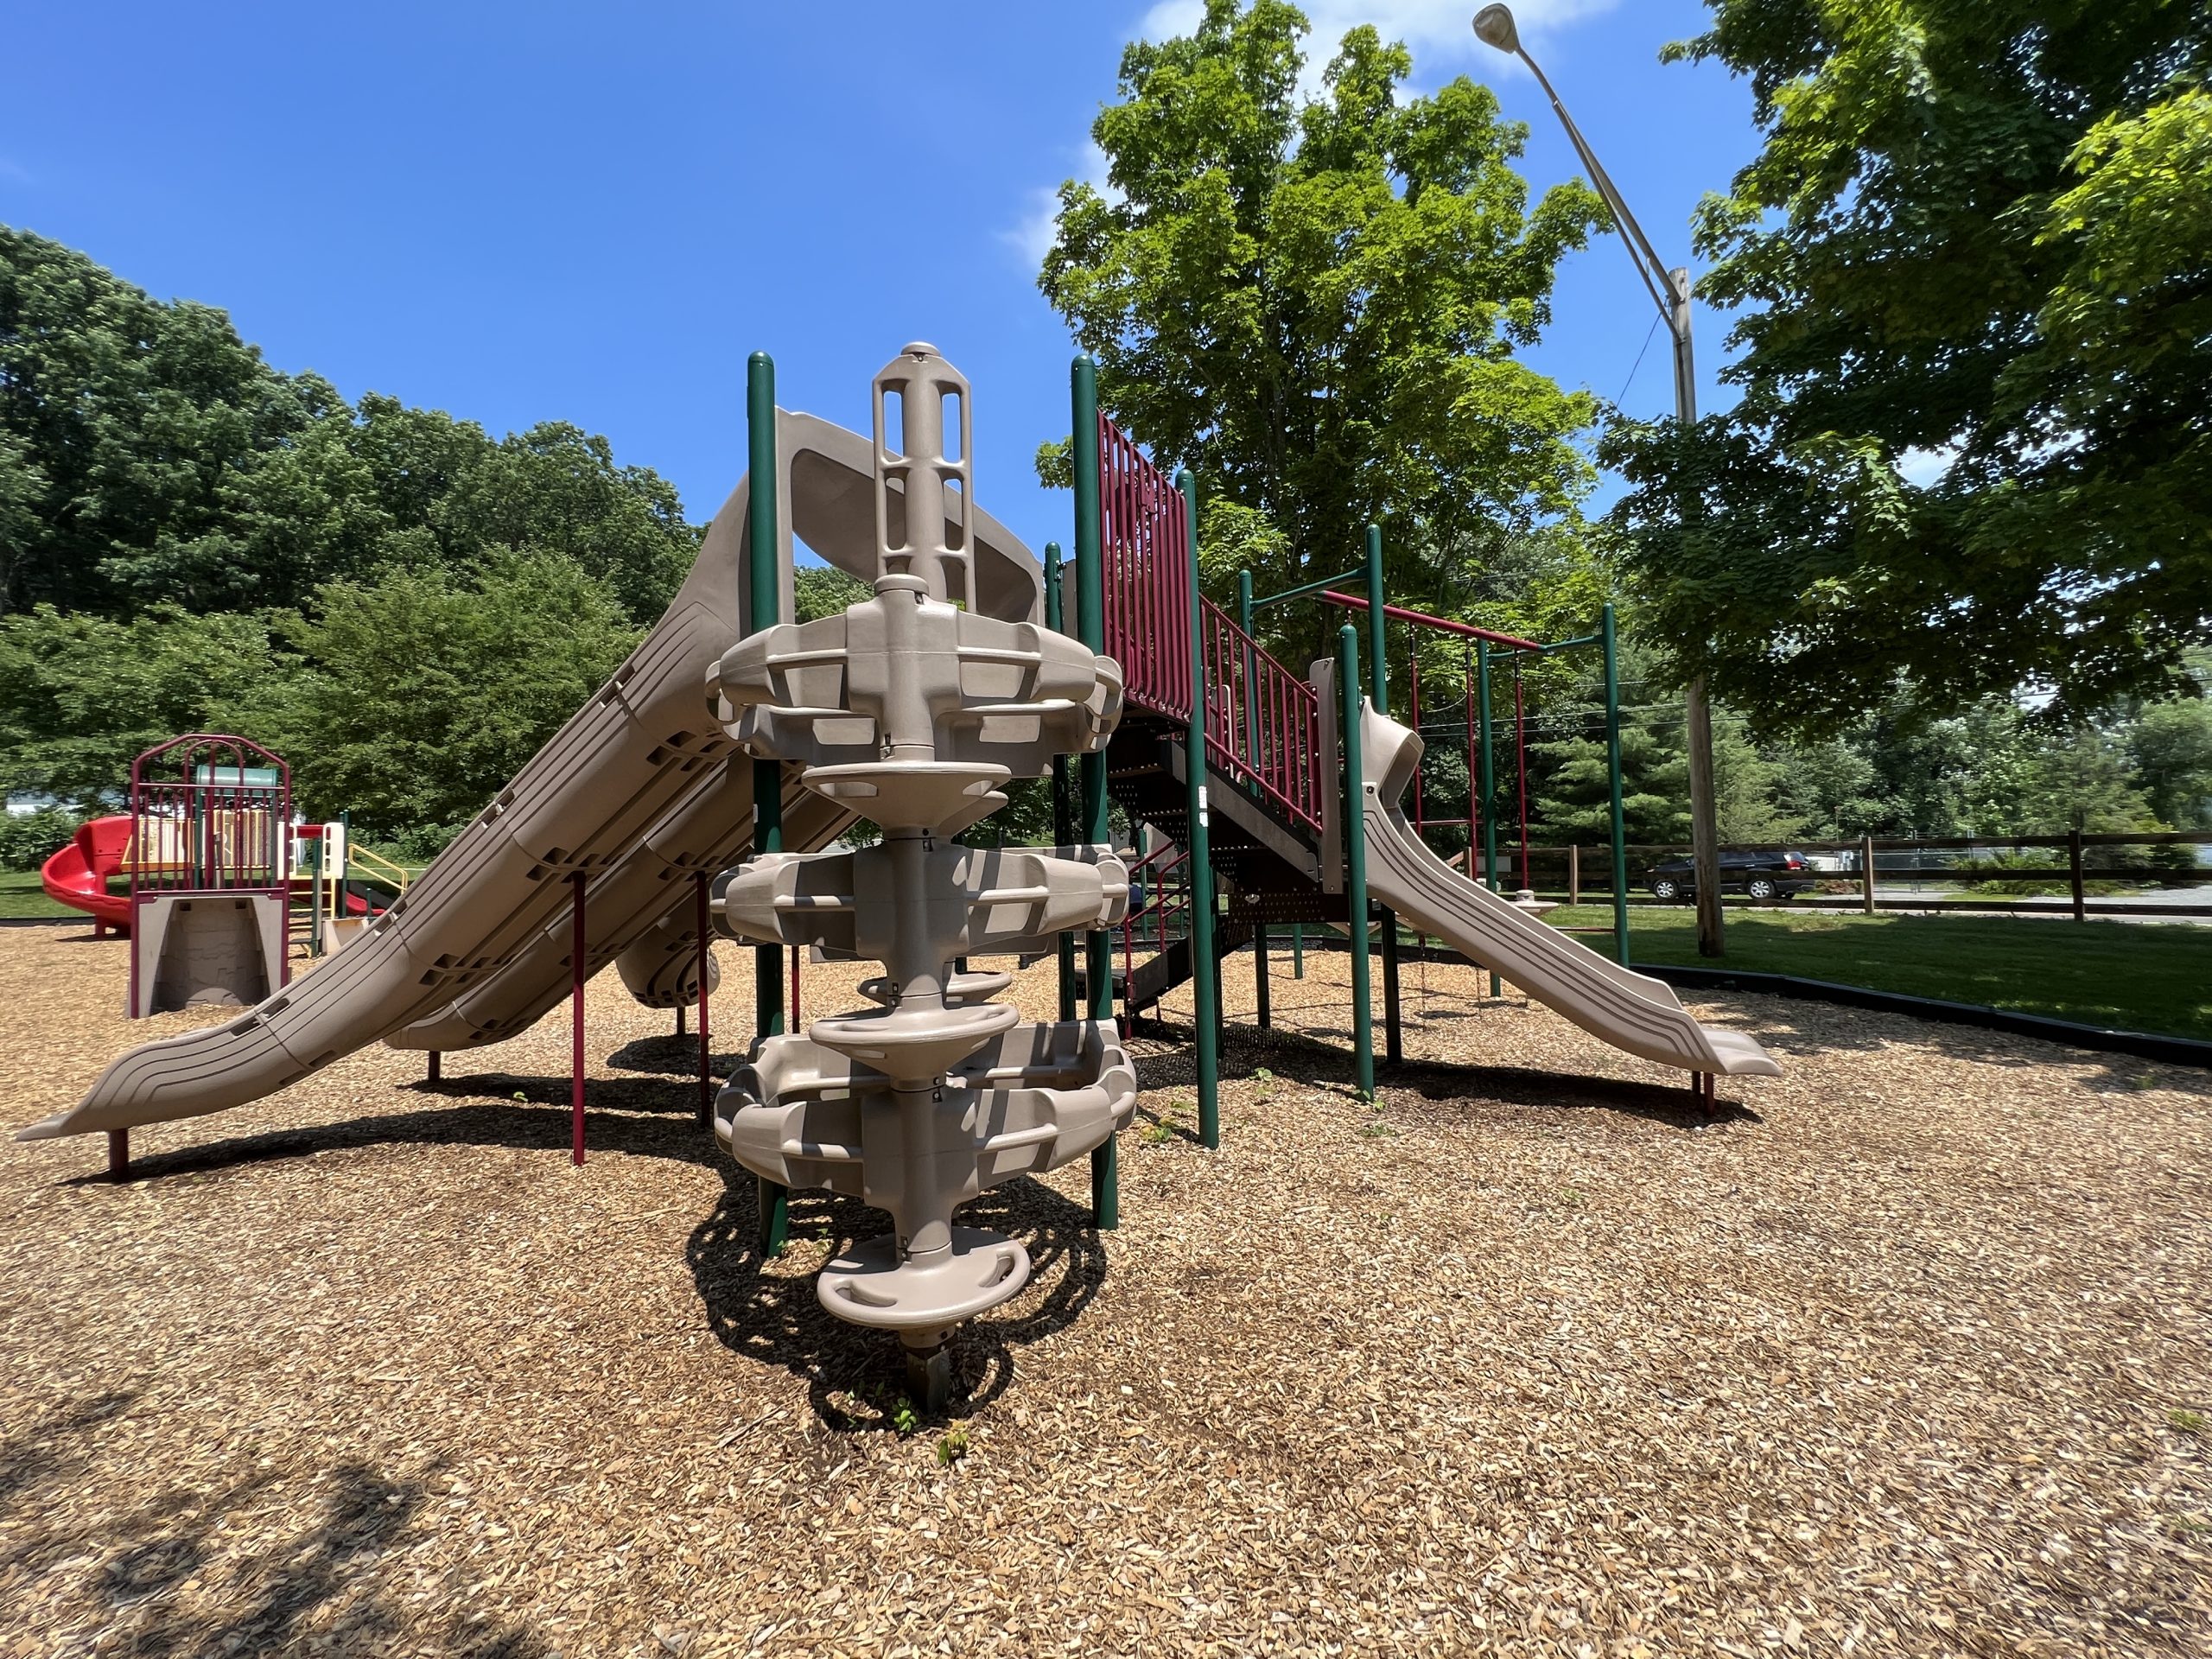 Lake Musconetcong Park Playground in Stanhope NJ - Features - climbing feature WIDE image